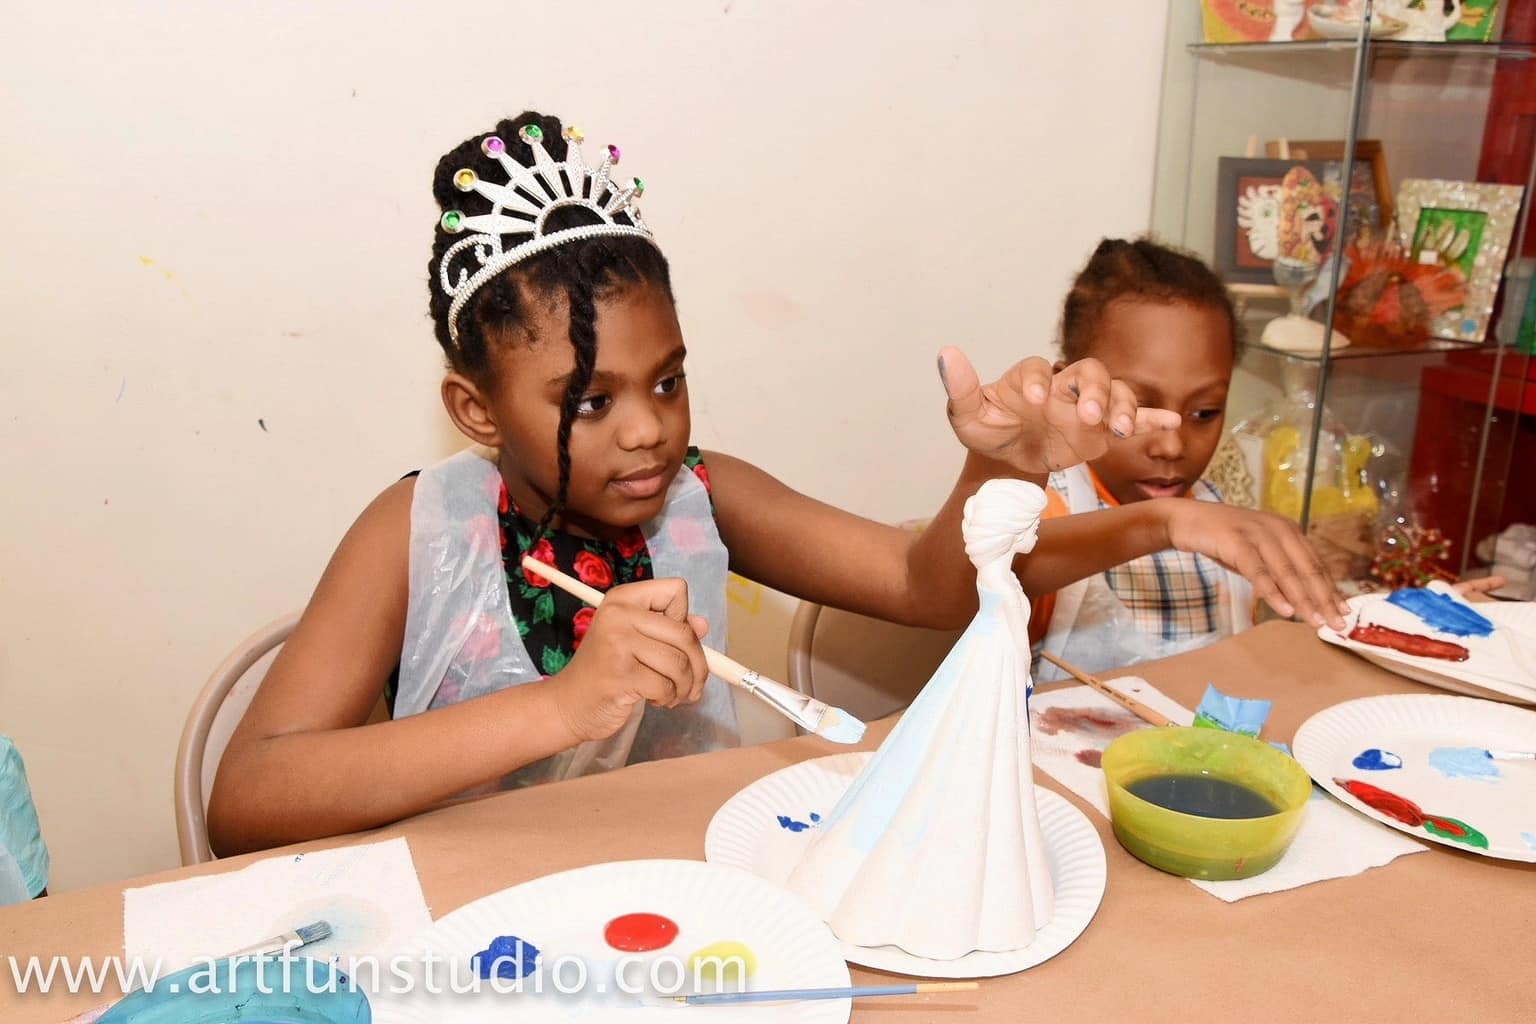 Ceramic painting is an option during birthday party event